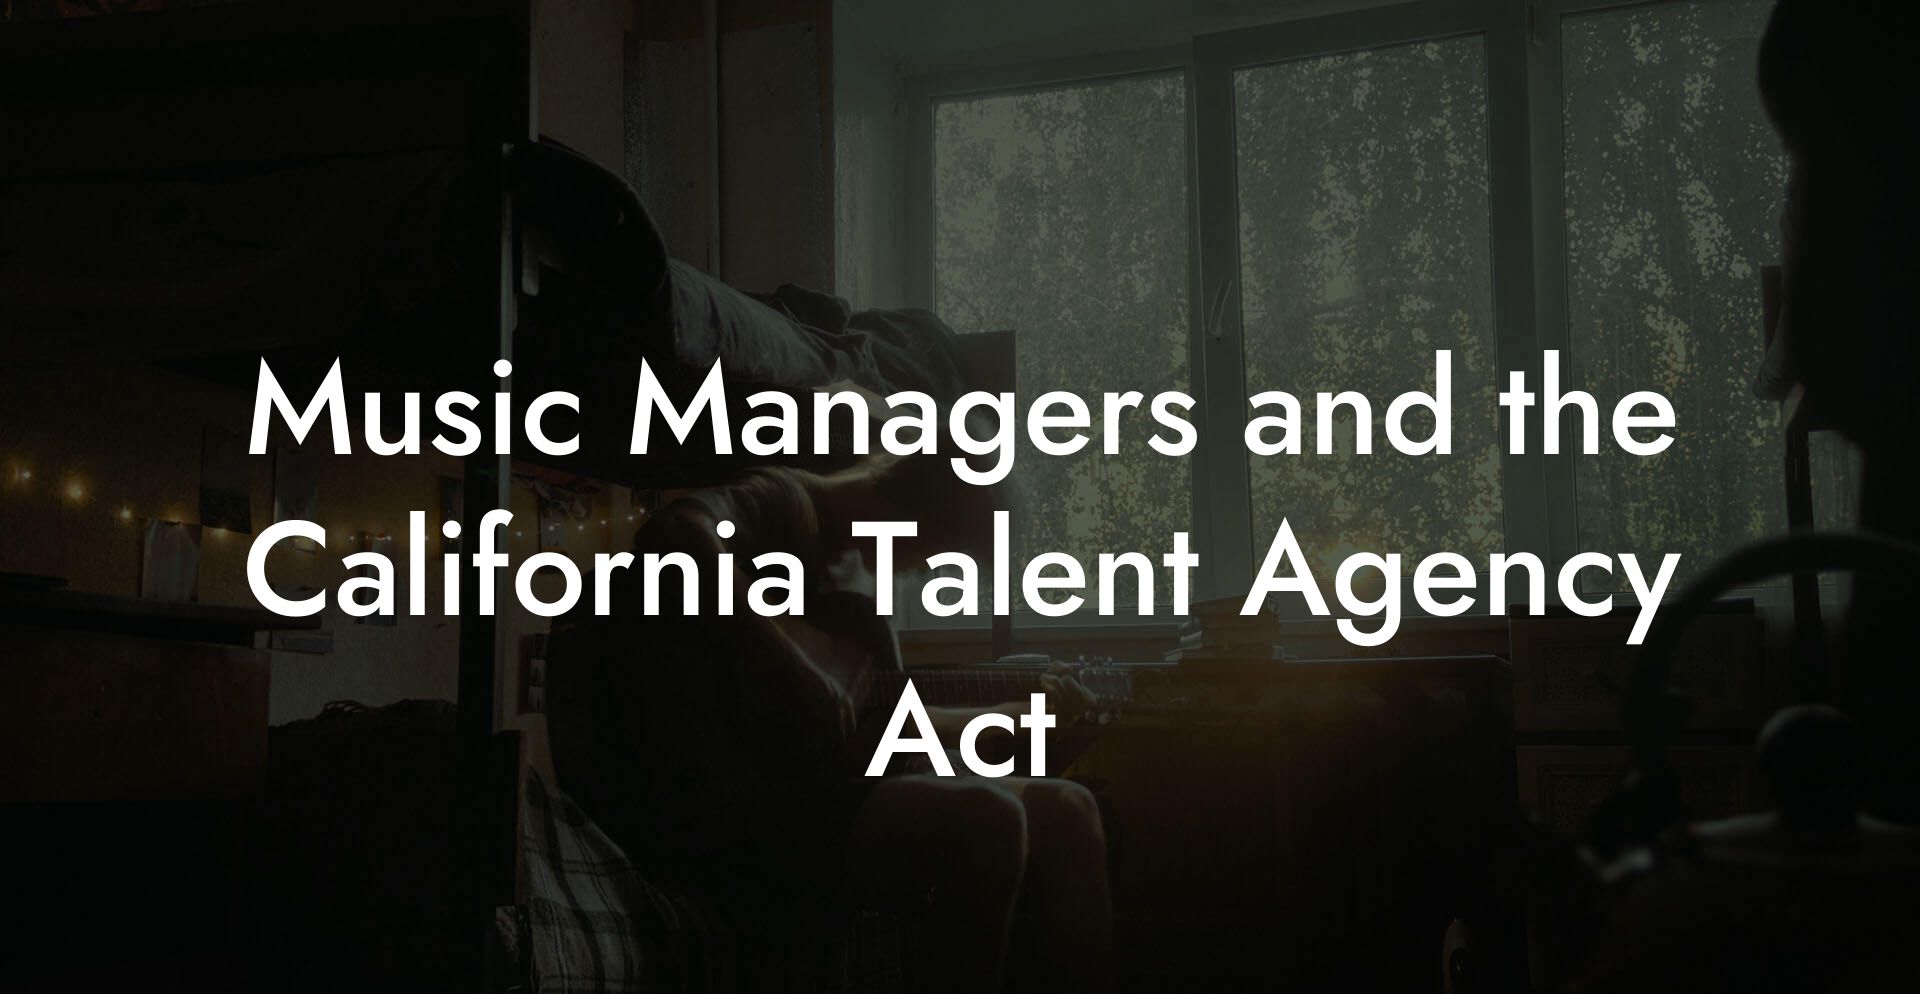 Music Managers and the California Talent Agency Act